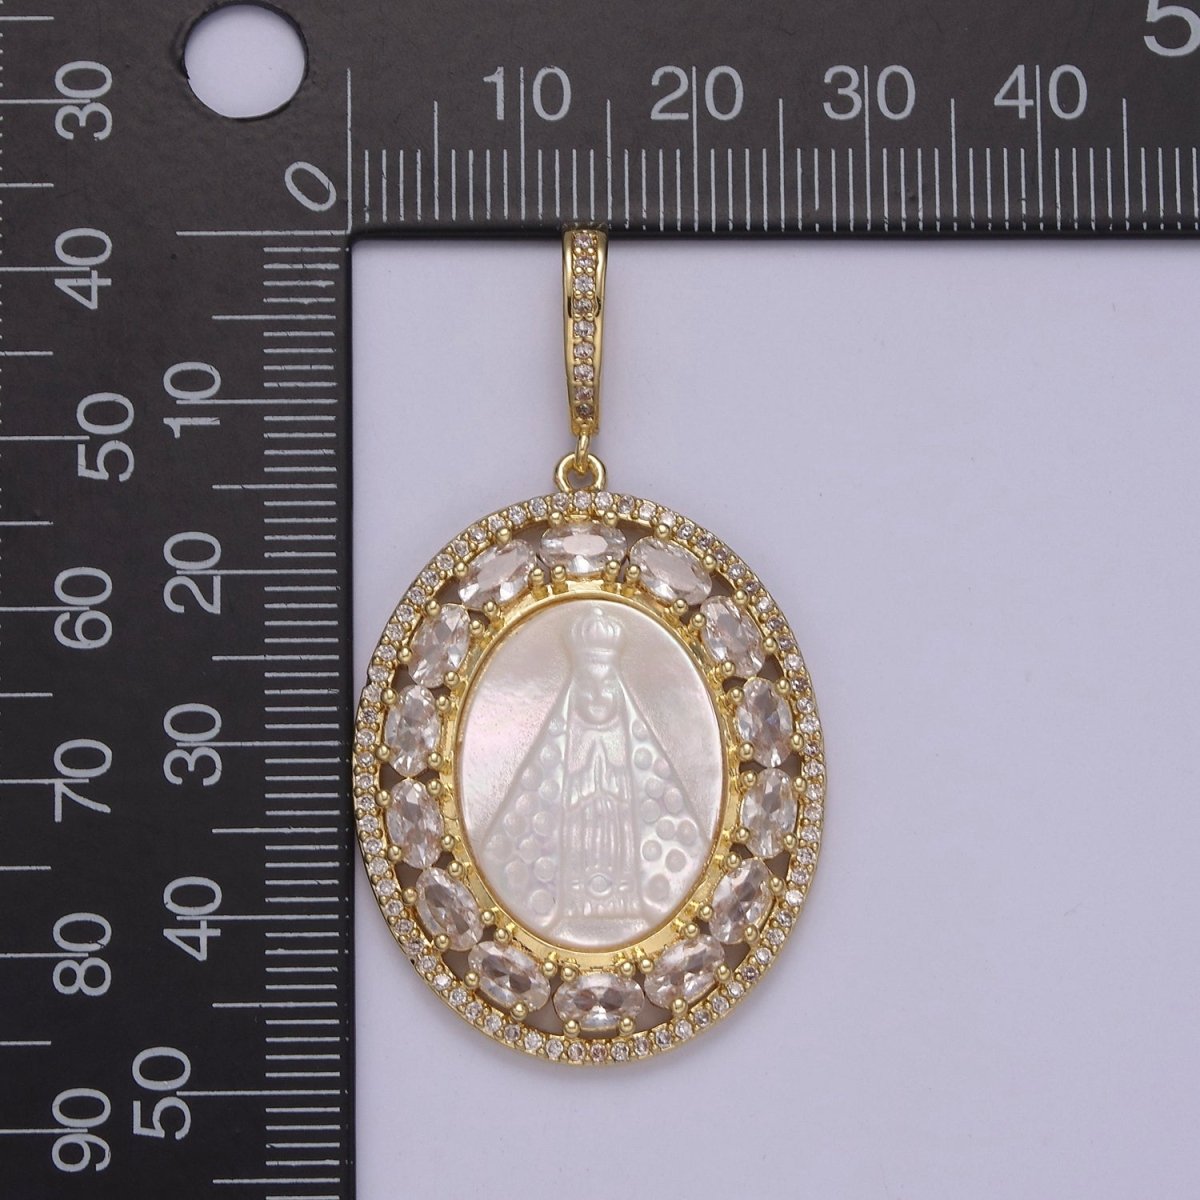 Antique Cameo Virgin Mary And Jesus Gold Pendant, Pearl Mary Pendant Religious Jewelry Making N-563 - DLUXCA